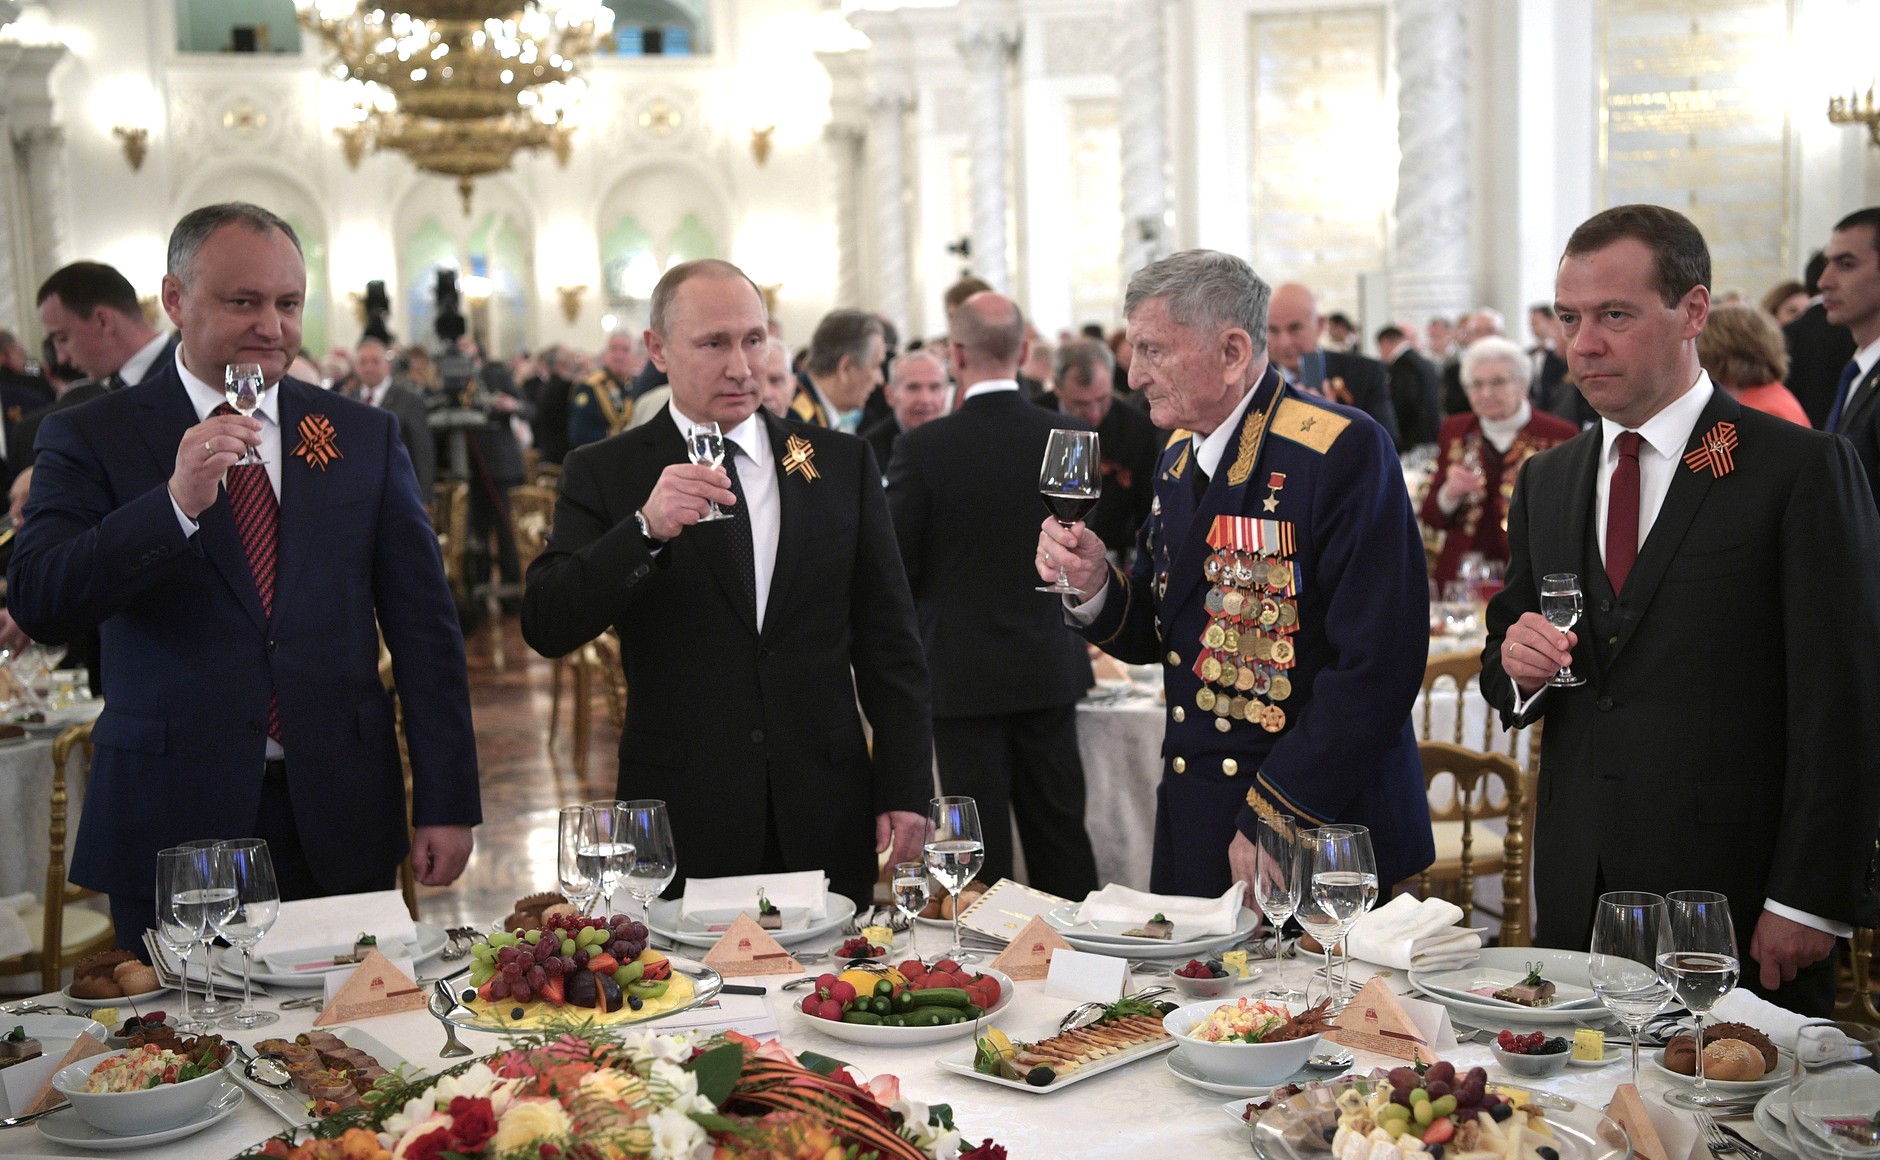 File:Victory Day reception in the Kremlin 2017-05-09 11.jpg - Wikimedia  Commons